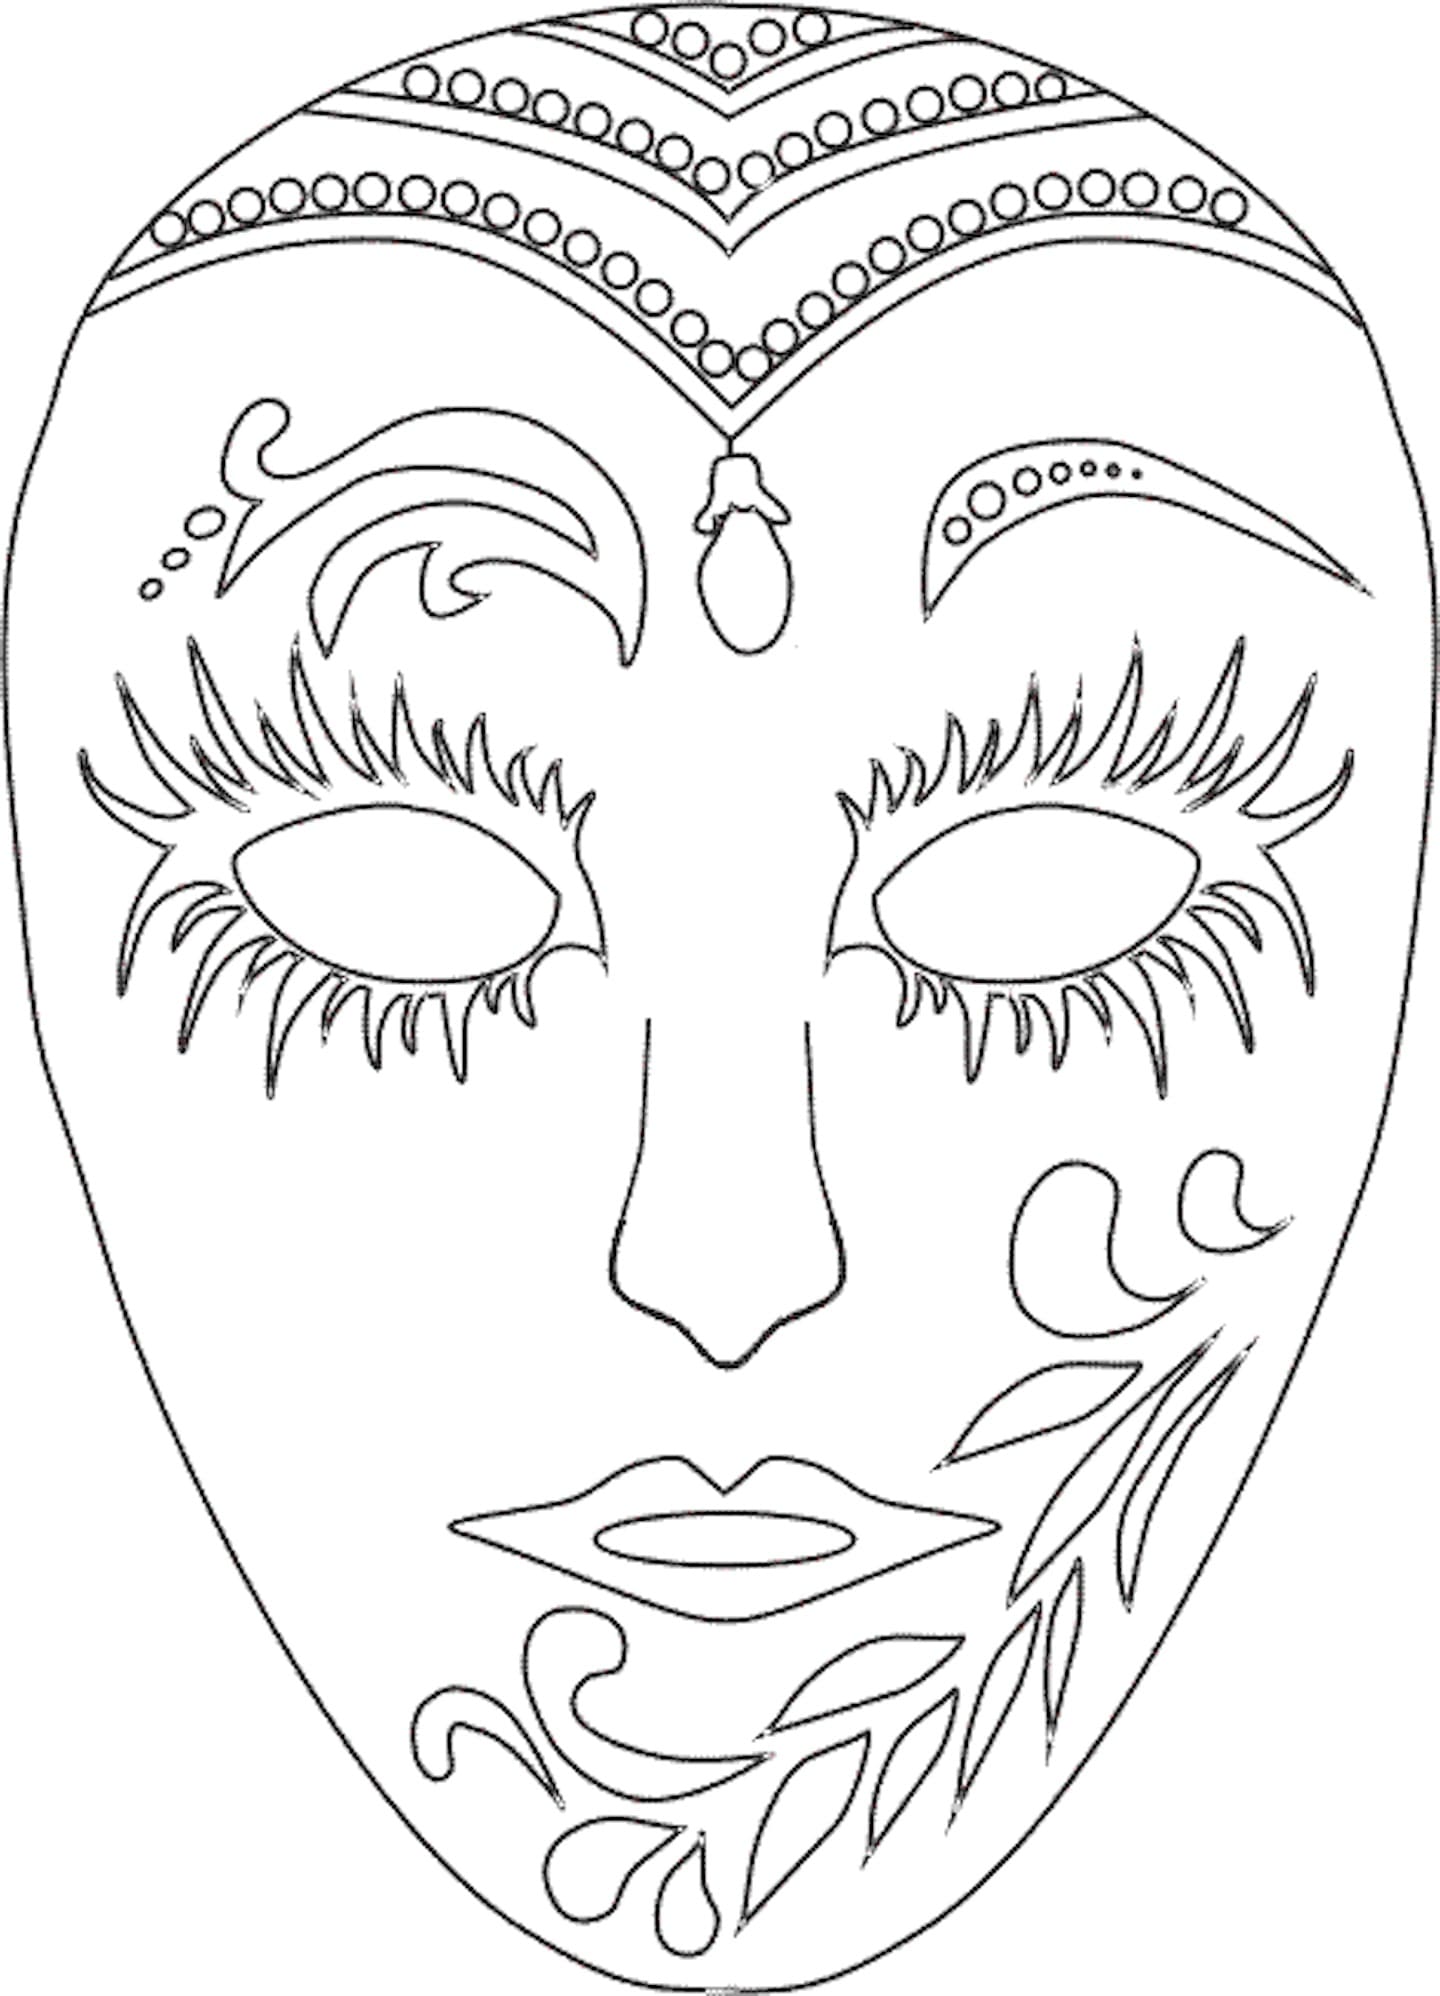 Halloween Masks Coloring Pages